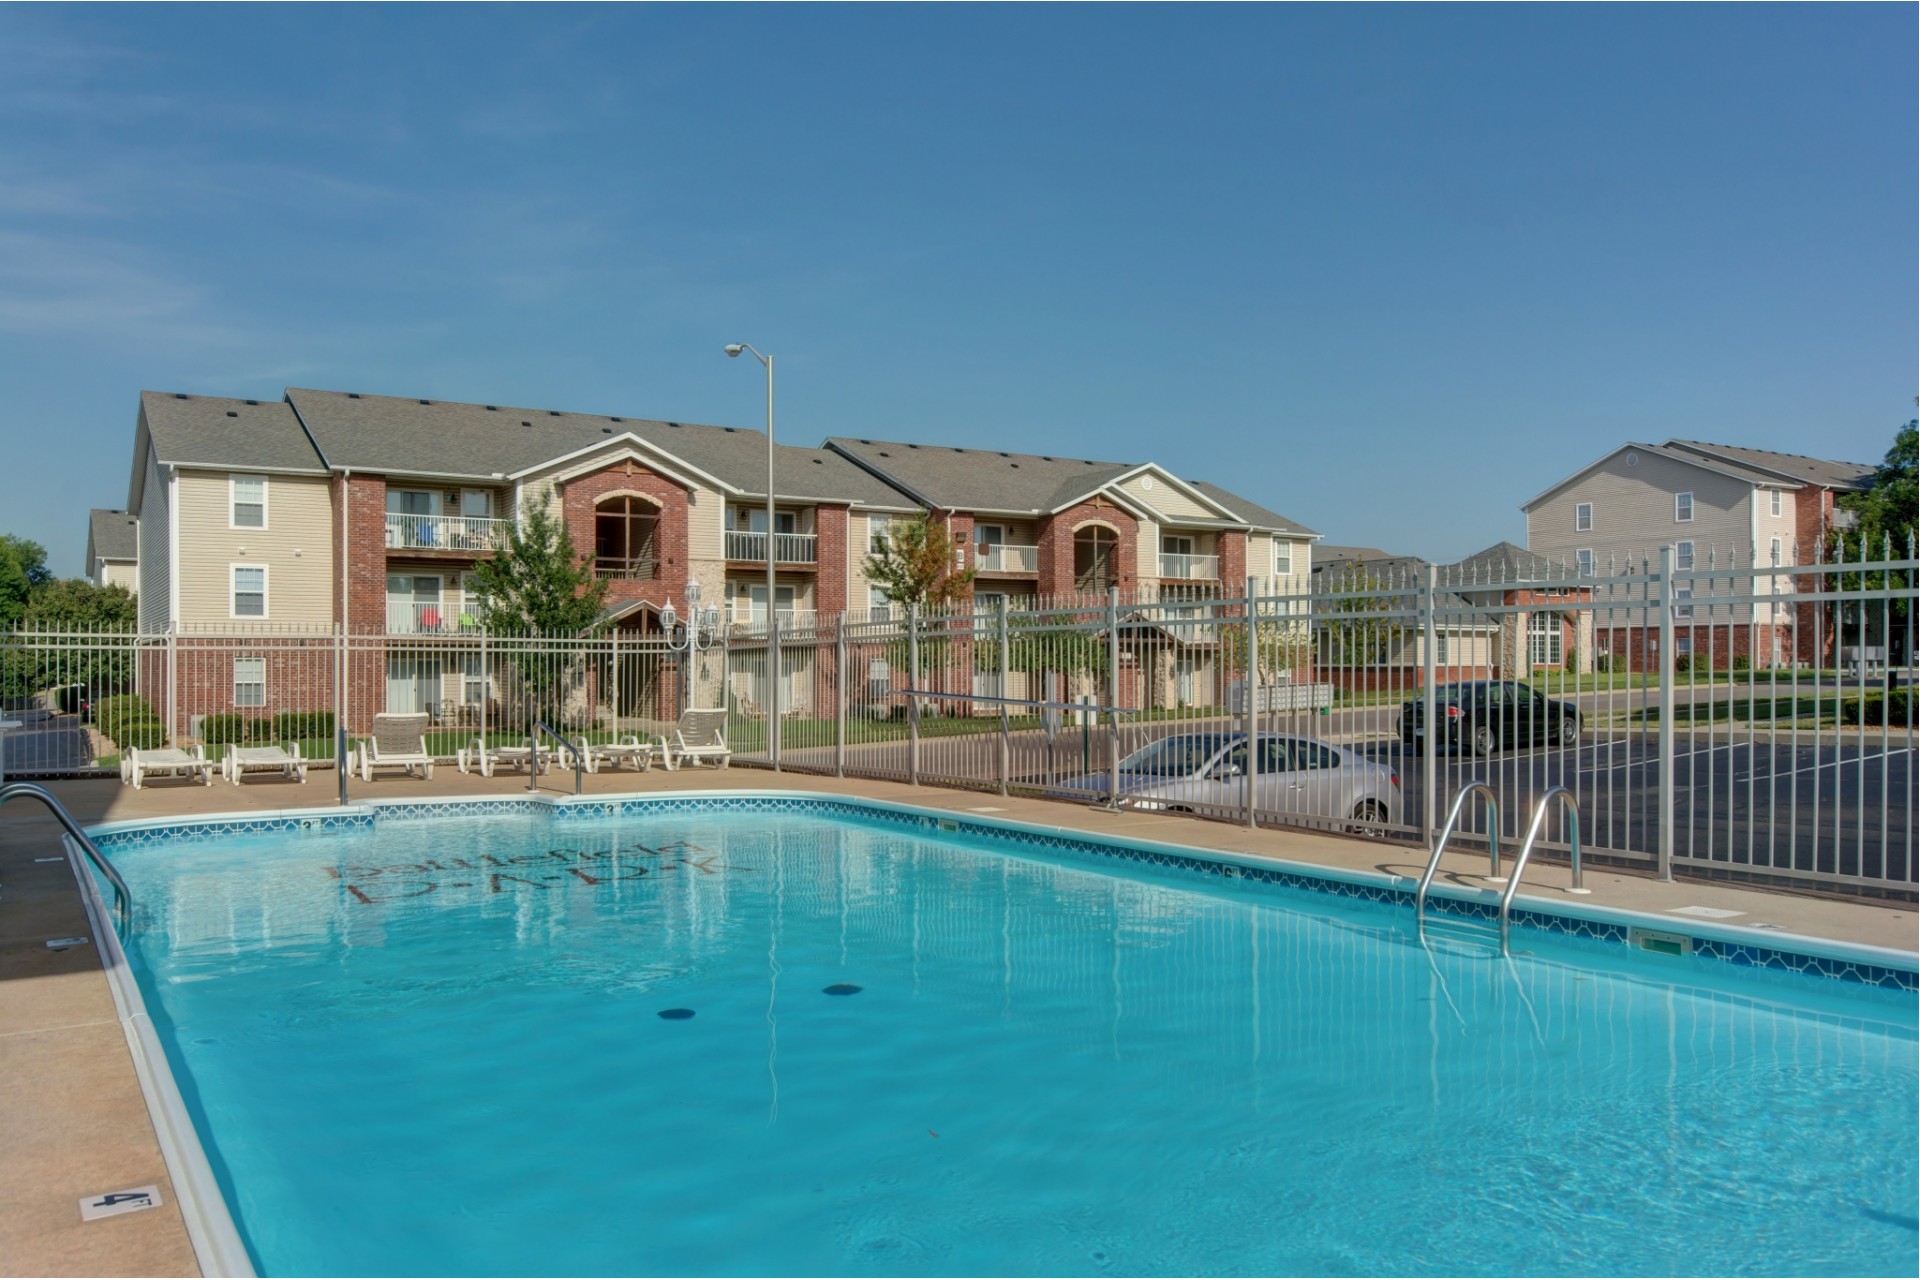 outdoor swimming pool and exterior apartment buildings at Battlefield Park